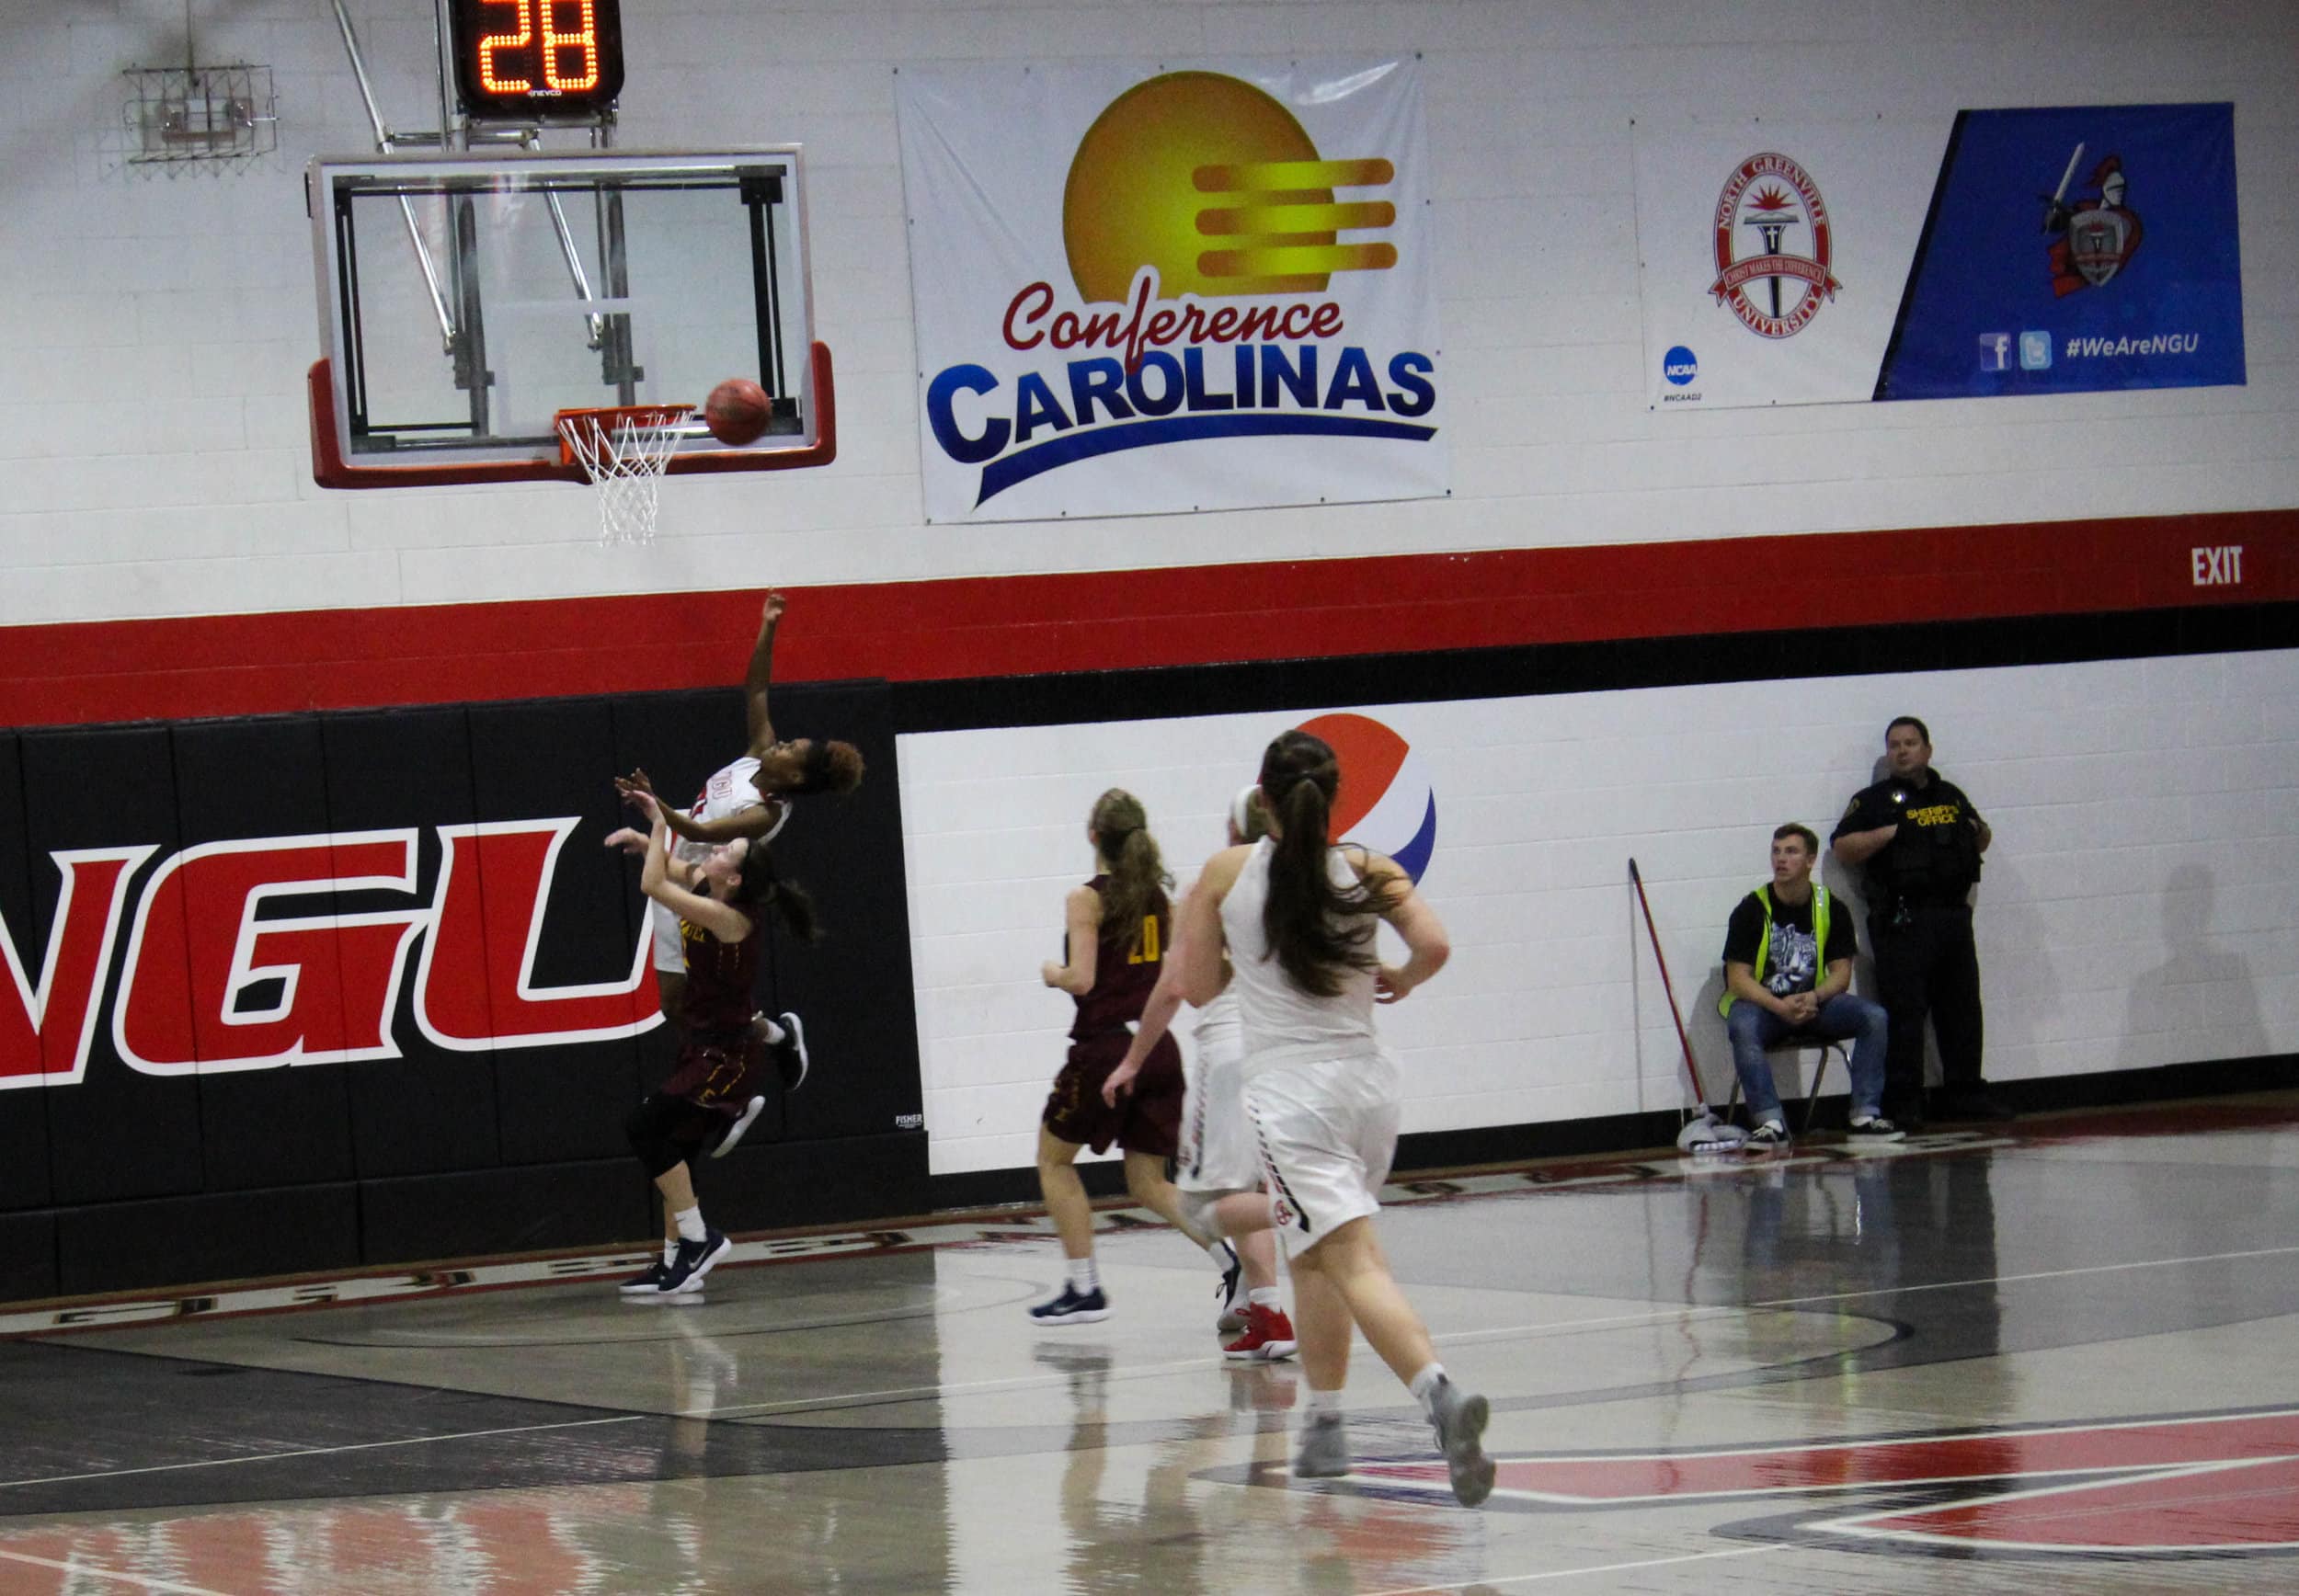 After getting a fast break down the court, Savannah Hughes (21) goes up and makes a layup.